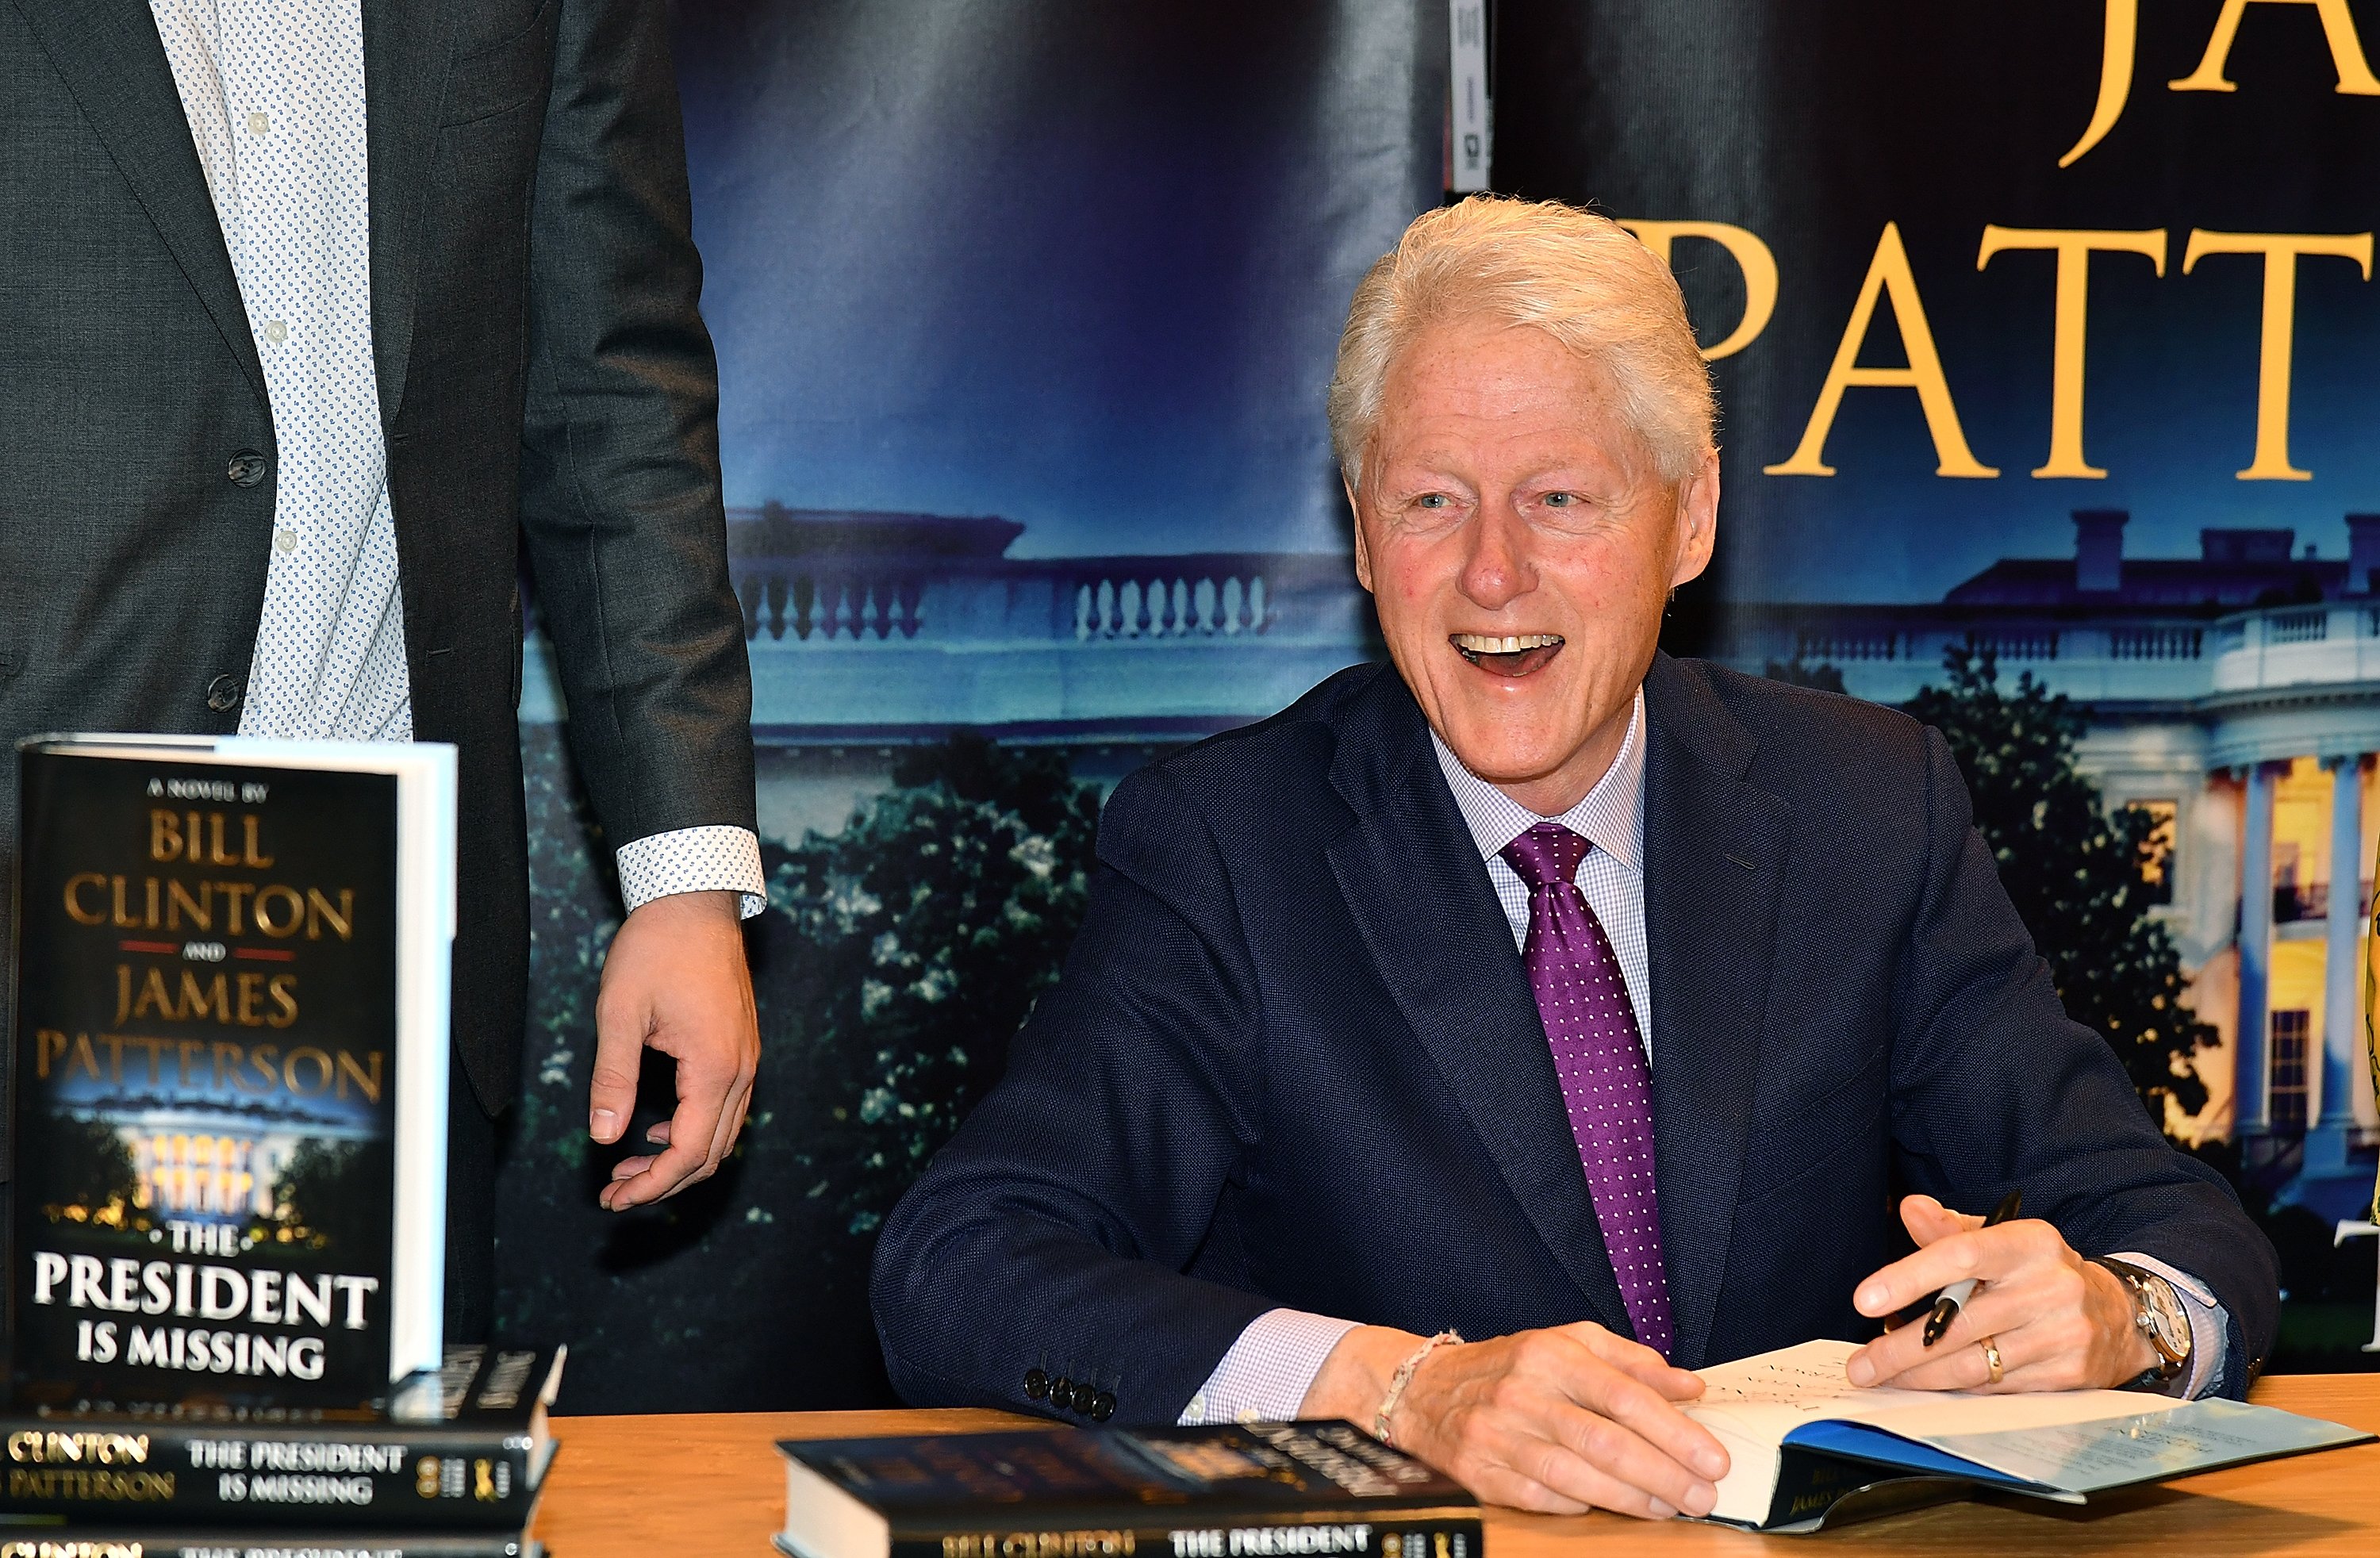 Bill Clinton signs copies of his new book co-authored with James Patterson "The President Is Missing" at Barnes & Noble on June 5, 2018 in New York City | Photo: Getty Images